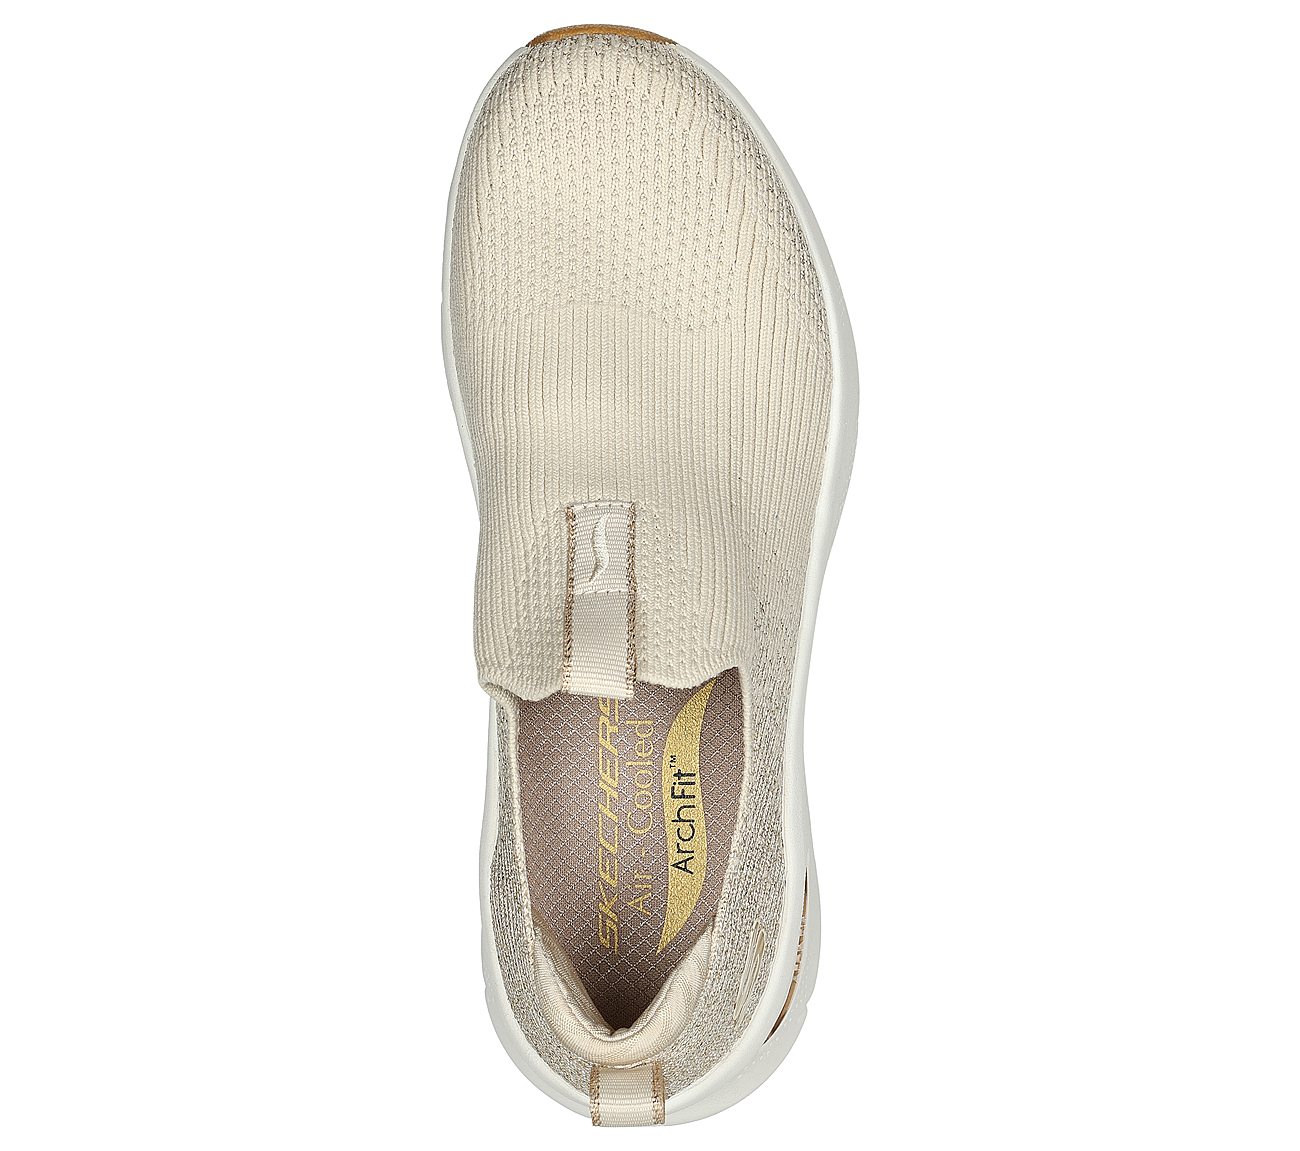 ARCH FIT D'LUX, NATURAL/GOLD Footwear Top View